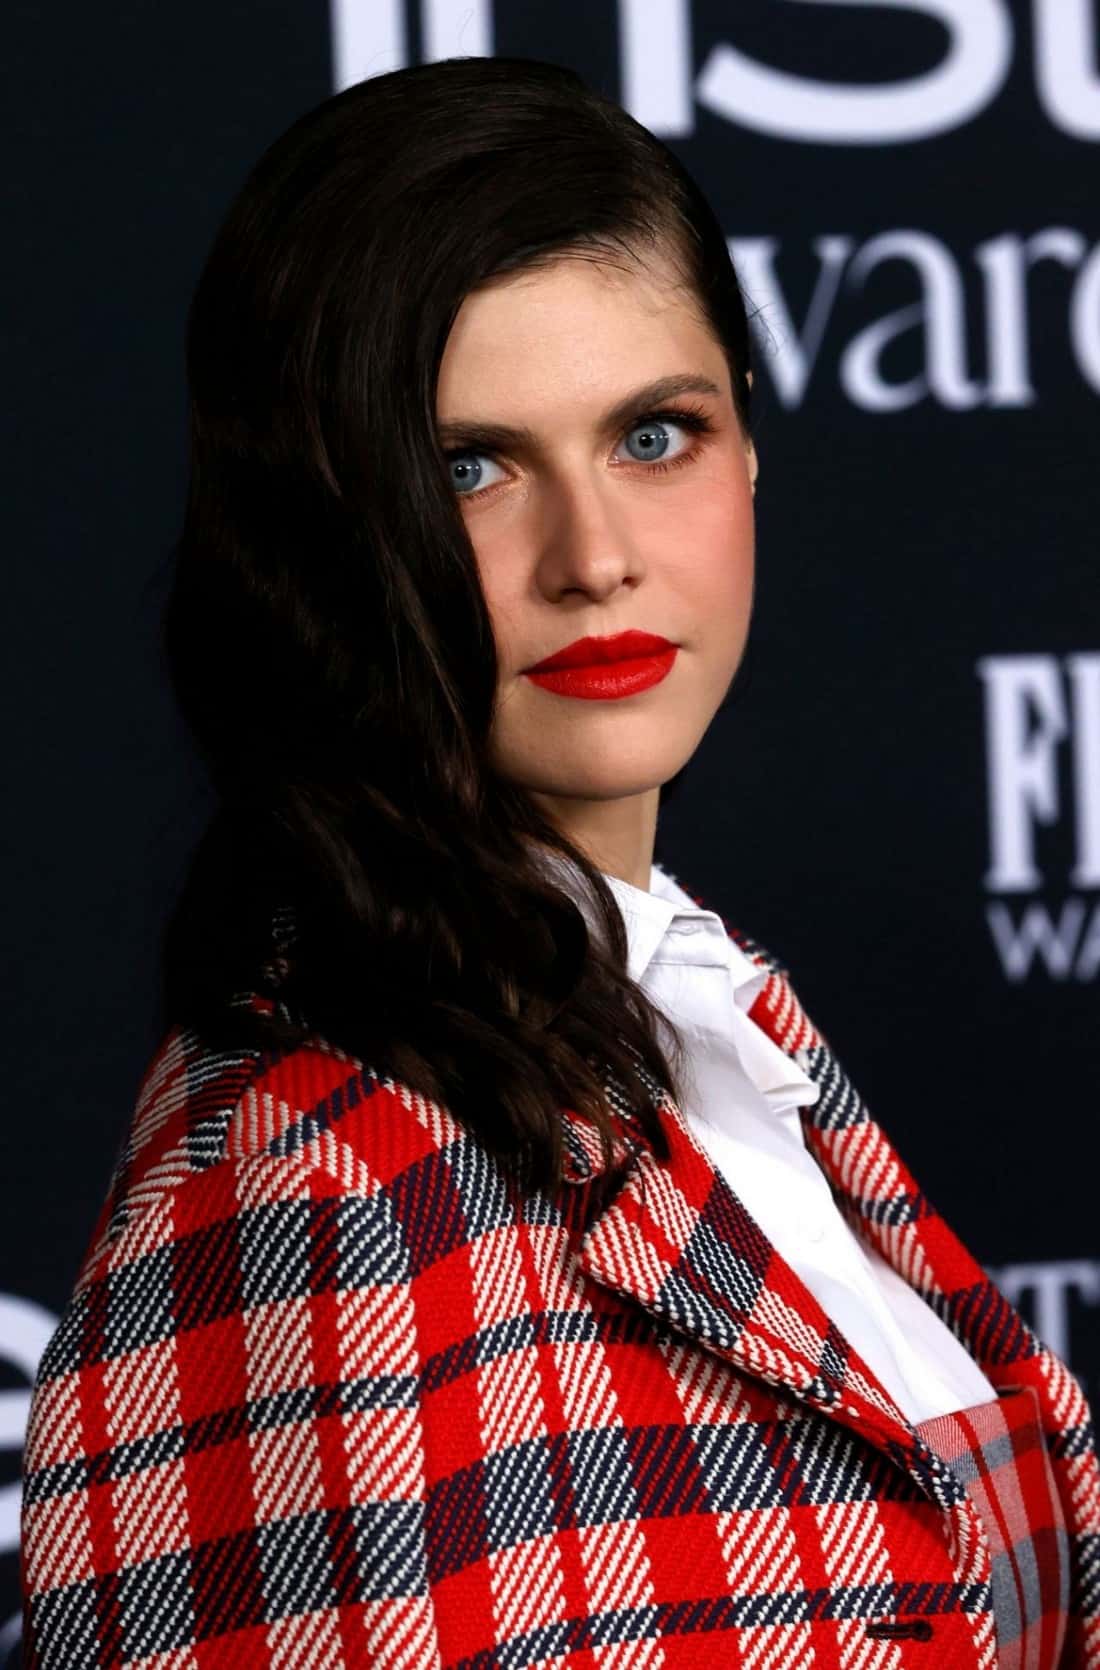 Alexandra Daddario Looks Chic in Red Plaid Set at InStyle Awards